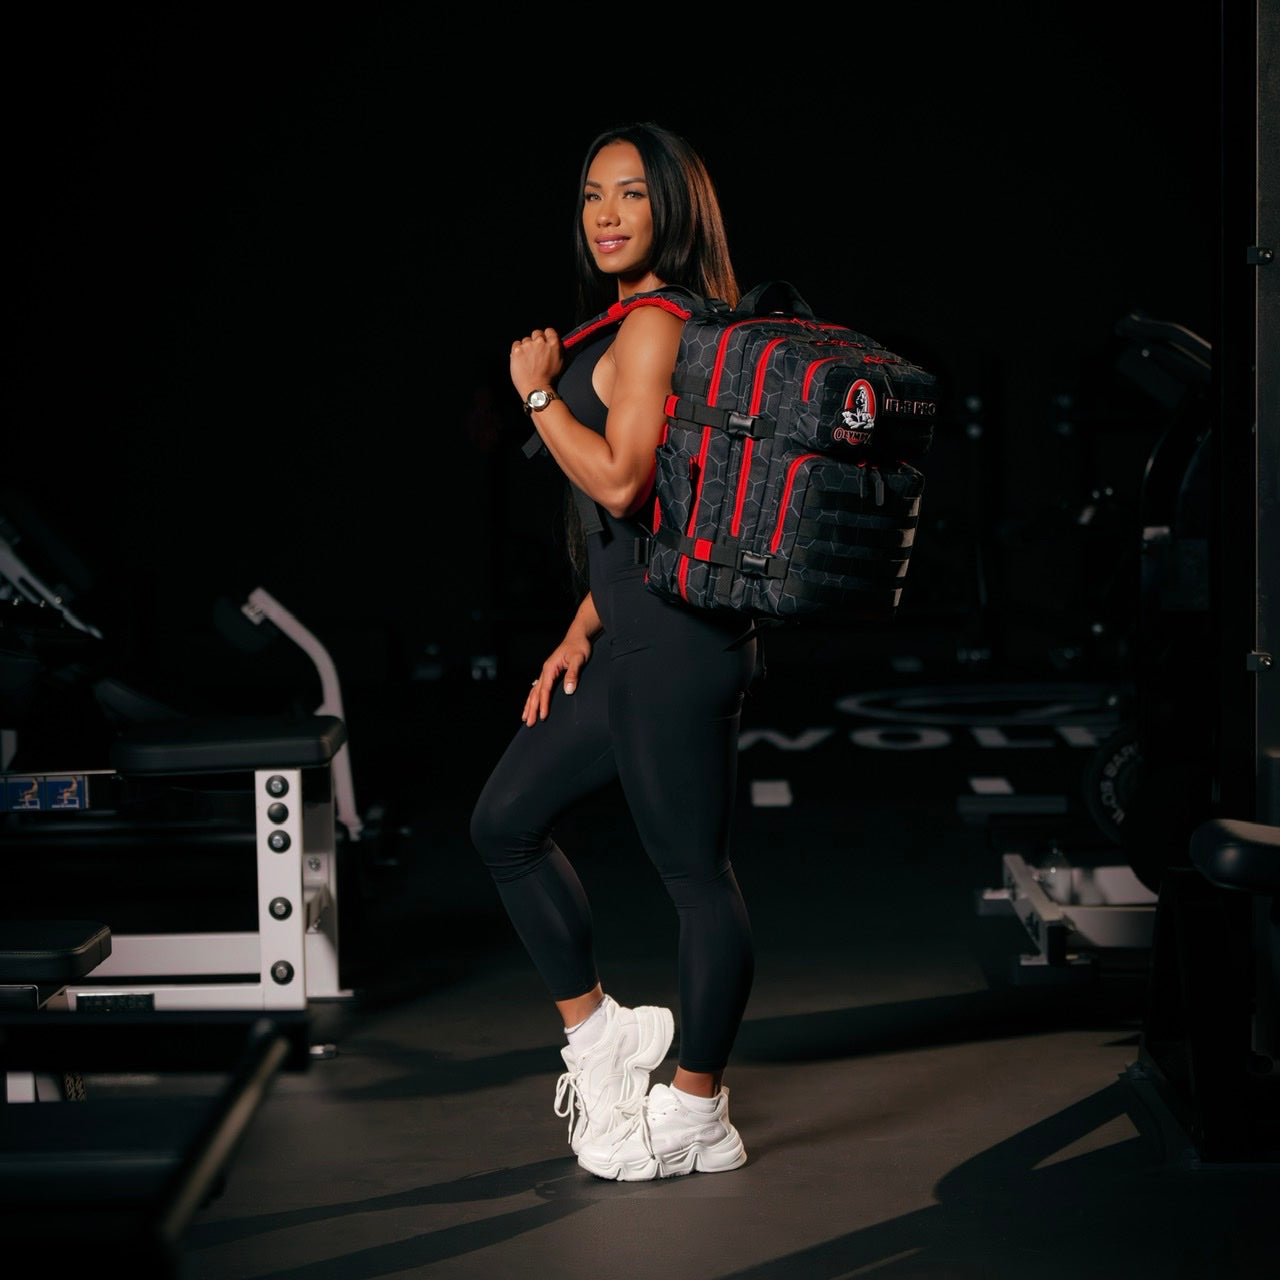 35L Backpack 2023 IFBB Olympia WOLFpak